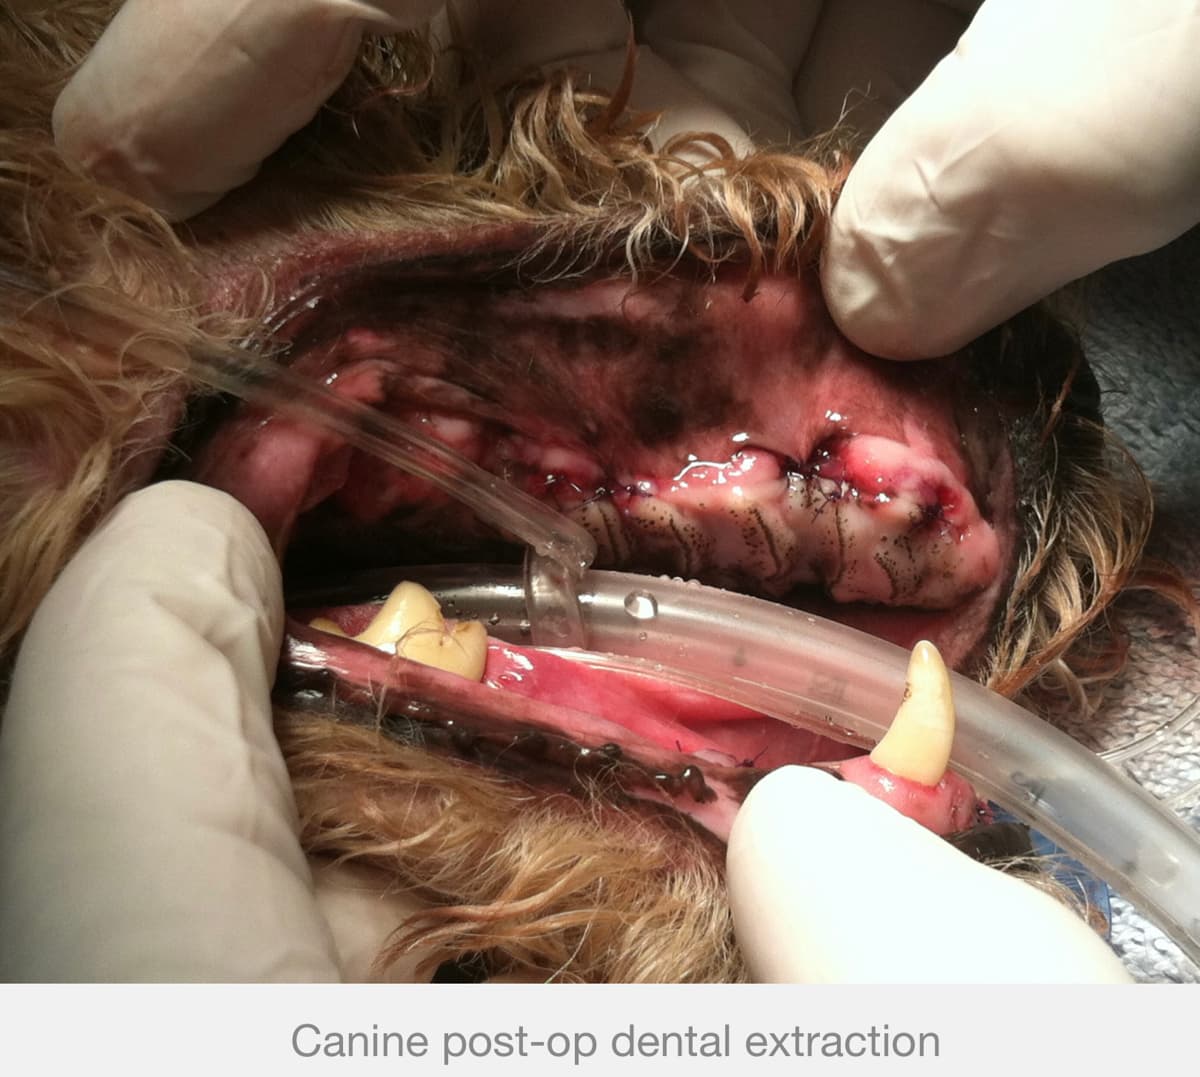 Canine post-op dental extraction